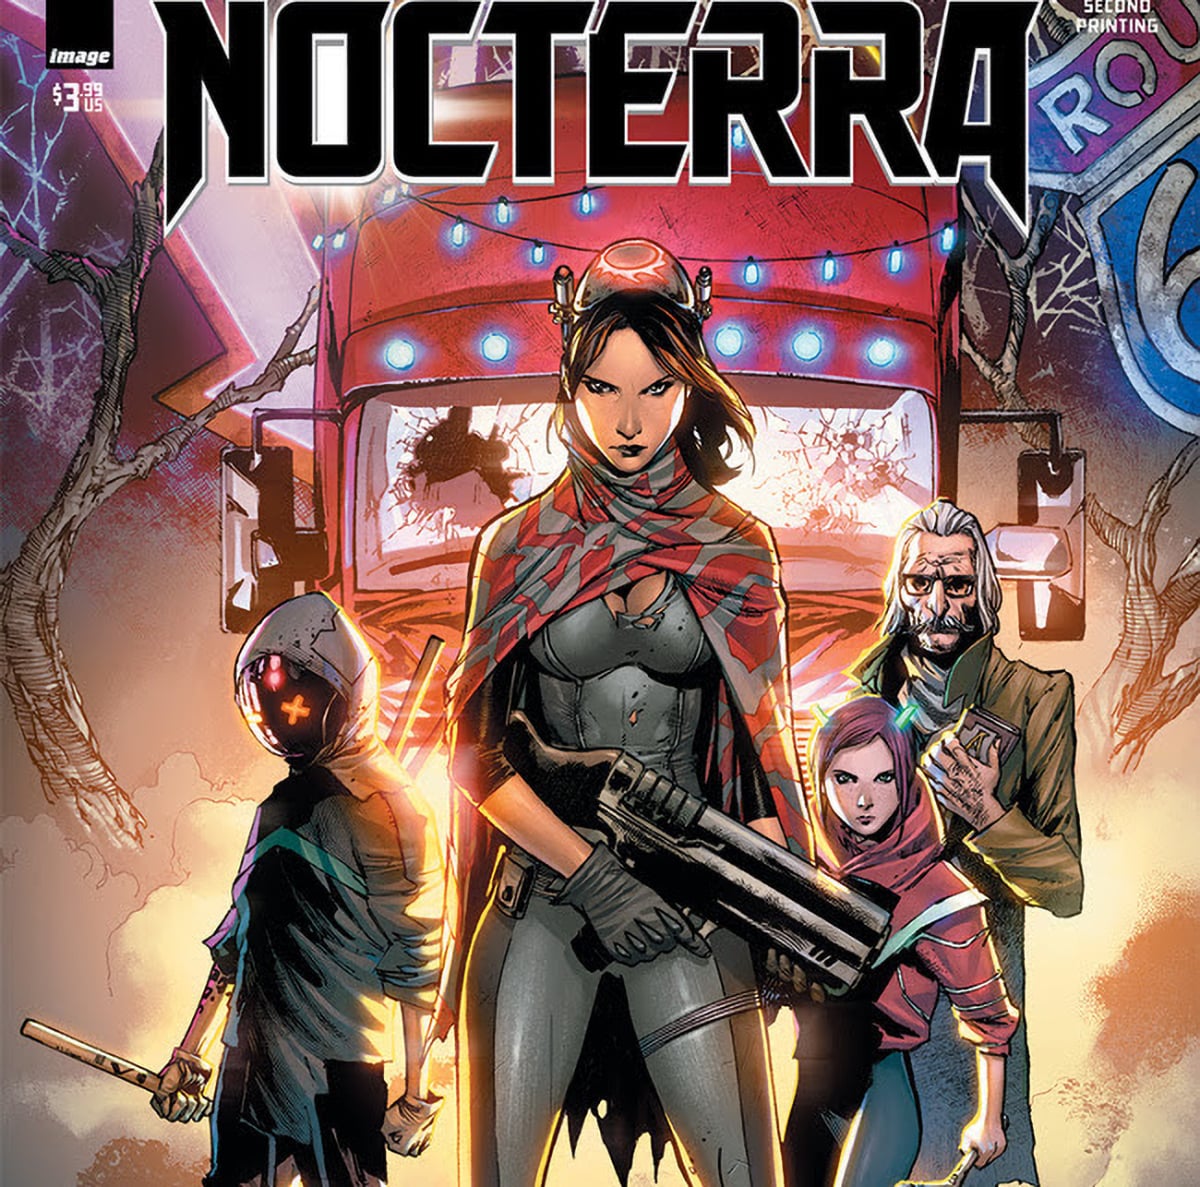 Image Comics' 'Nocterra' #2 sells out and goes back to print